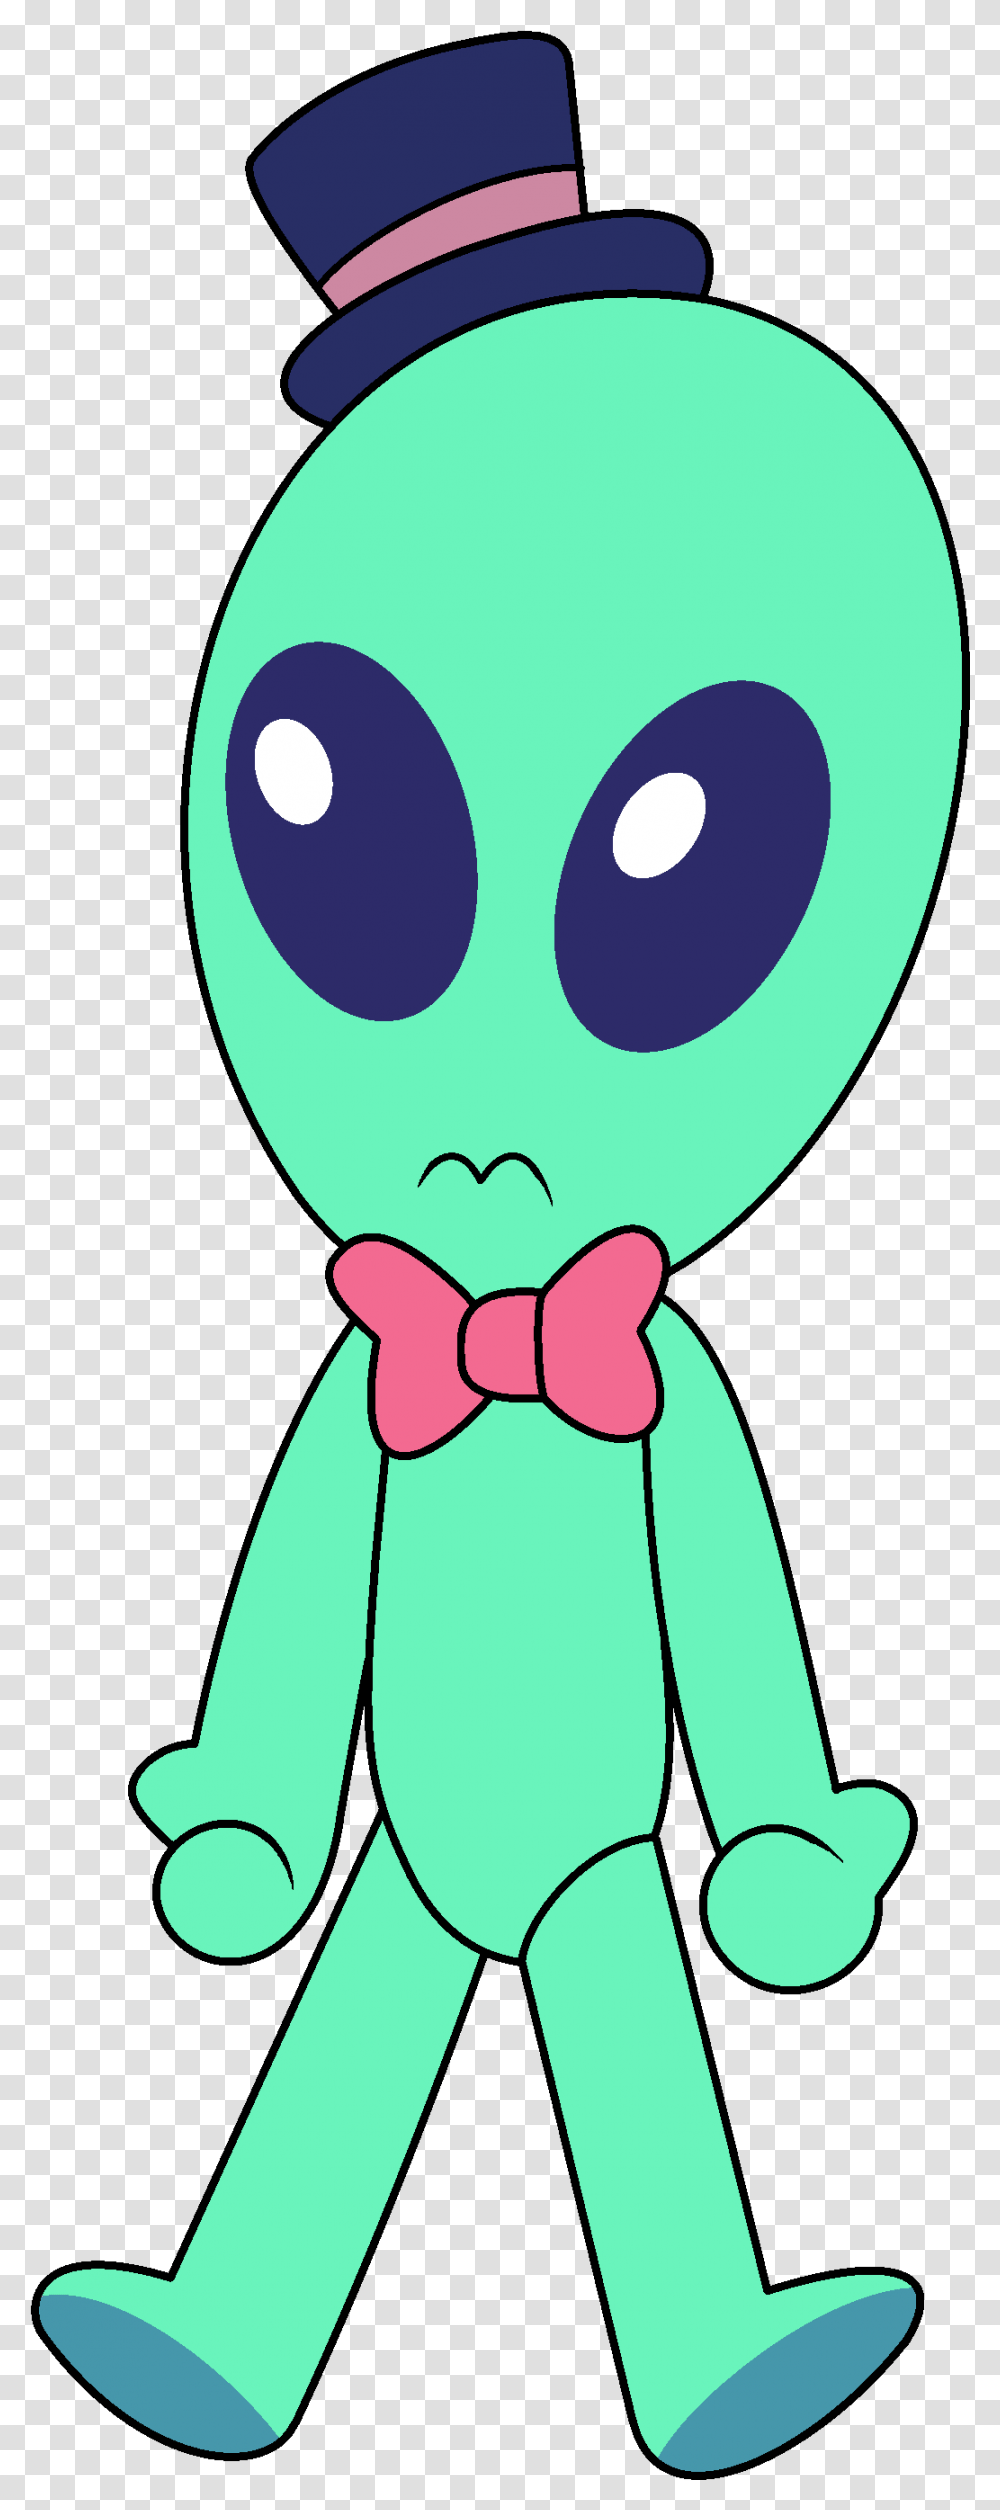 Minor Objectstoys Steven Universe Peridot's Alien, Sweets, Food, Confectionery, Face Transparent Png